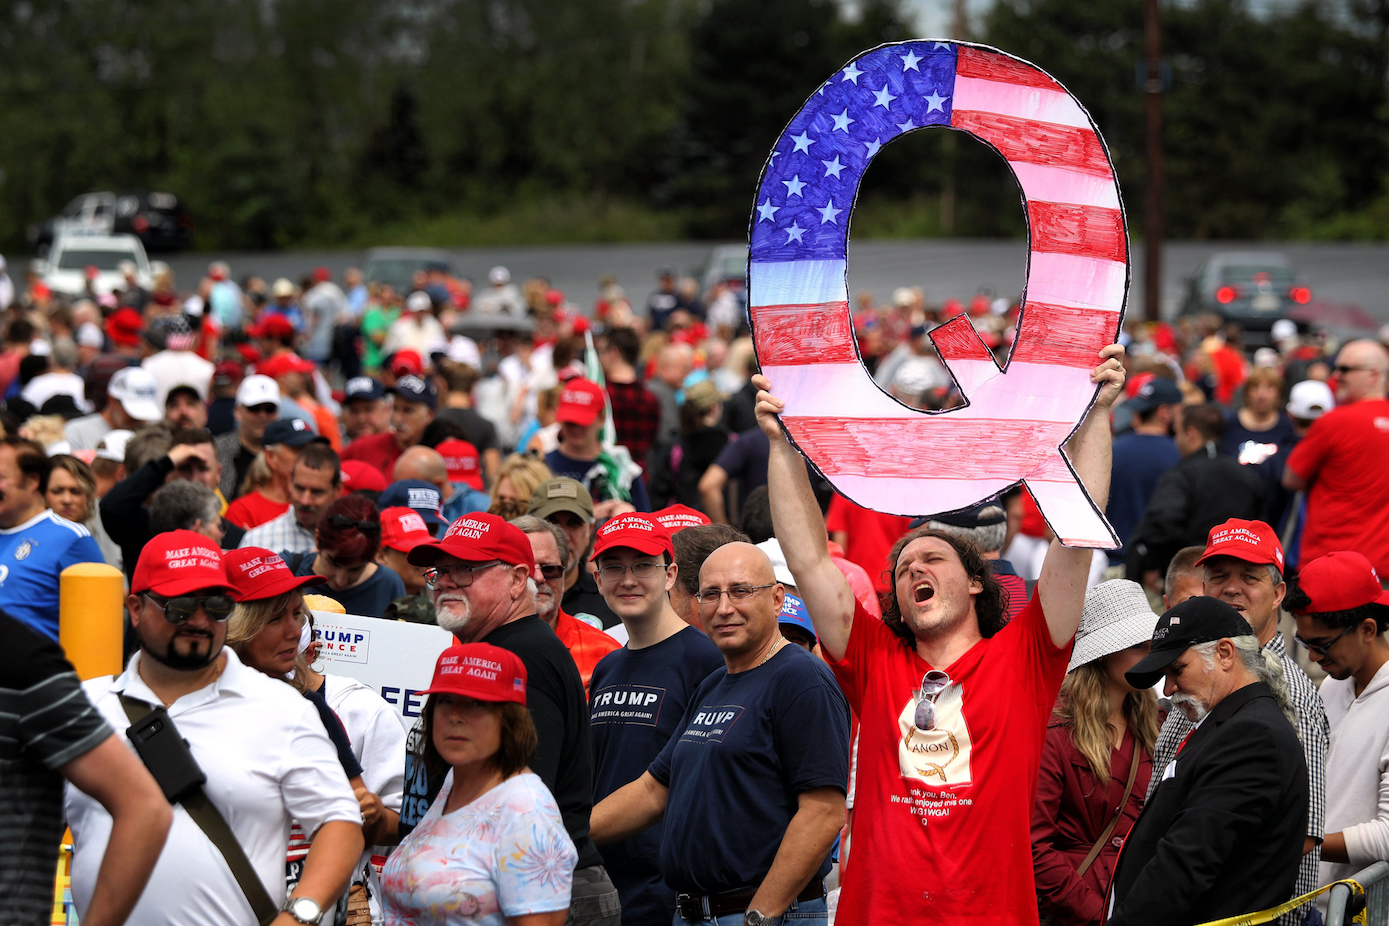 Is #Savethechildren trending on your social media? Here's why suburbanites are drawn to QAnon conspiracies.